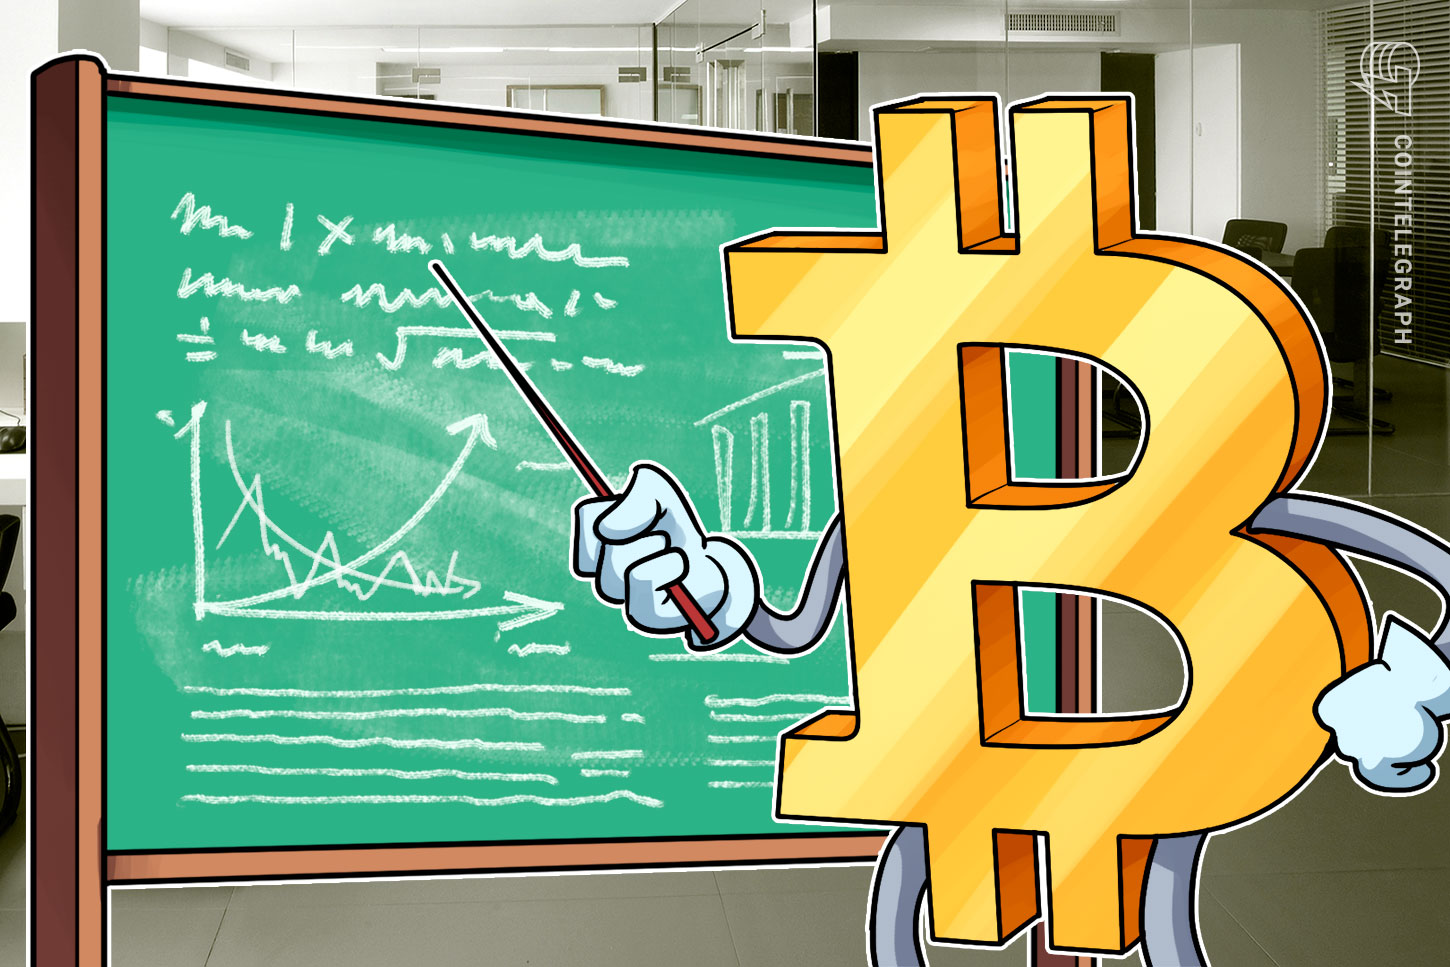 Stablecoin metric hints Bitcoin worth will rise as consumers snap up BTC